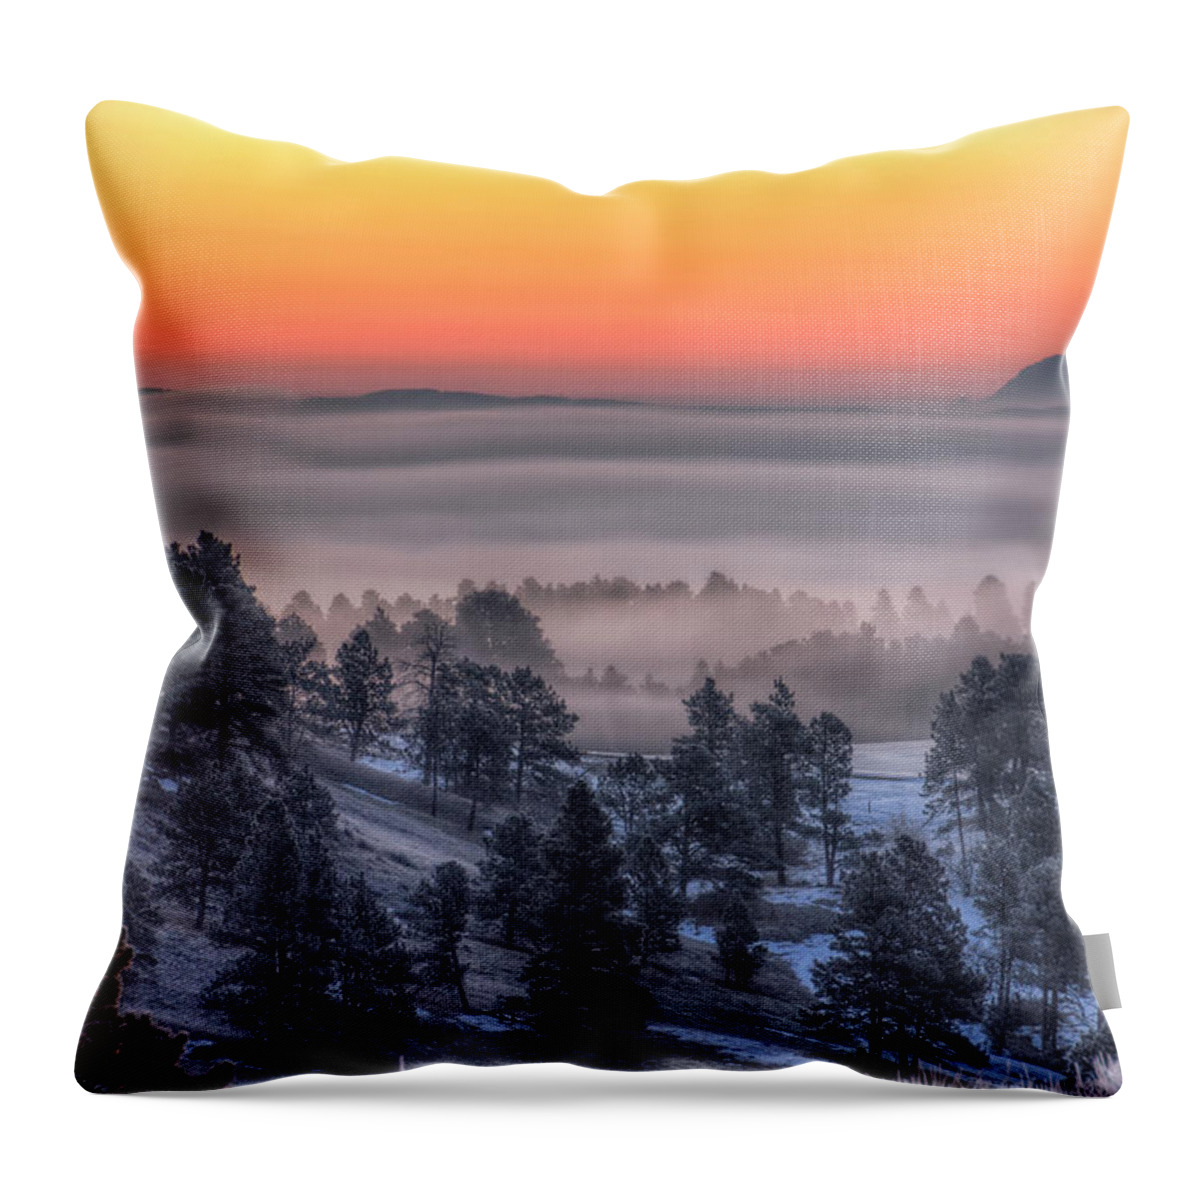 Fog Throw Pillow featuring the photograph Foggy Dawn by Fiskr Larsen